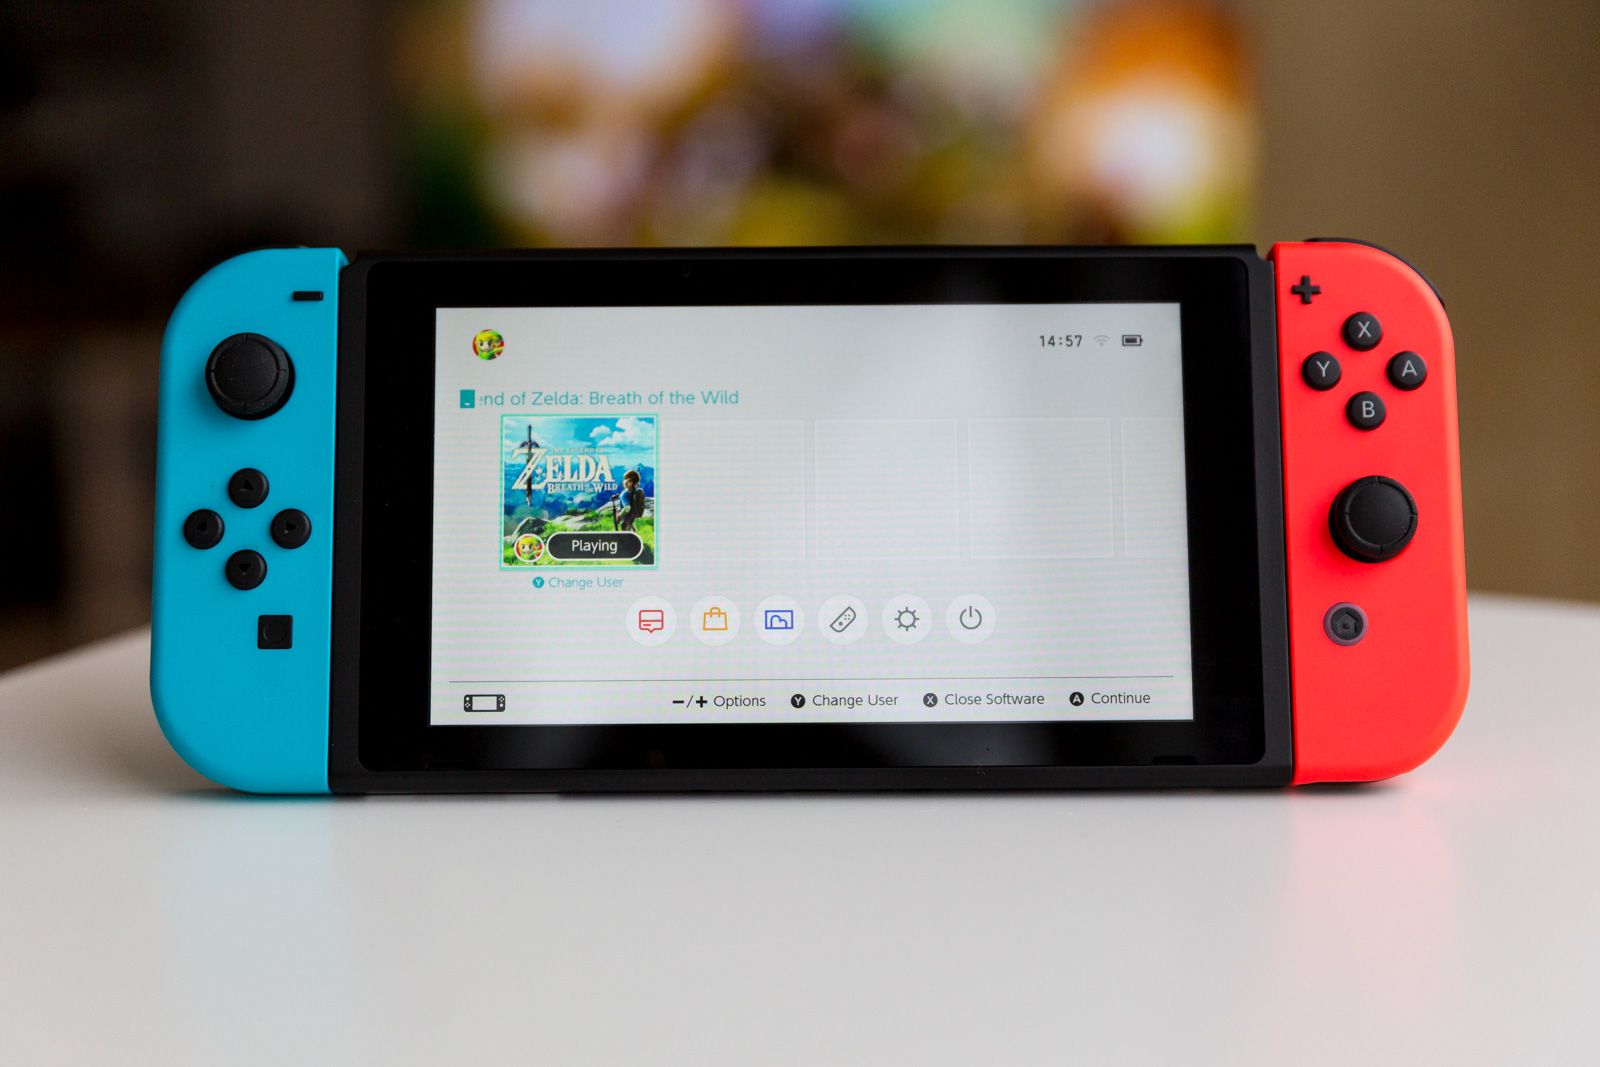 Nintendo Switch OLED model vs Nintendo Switch: What's the difference? photo 5